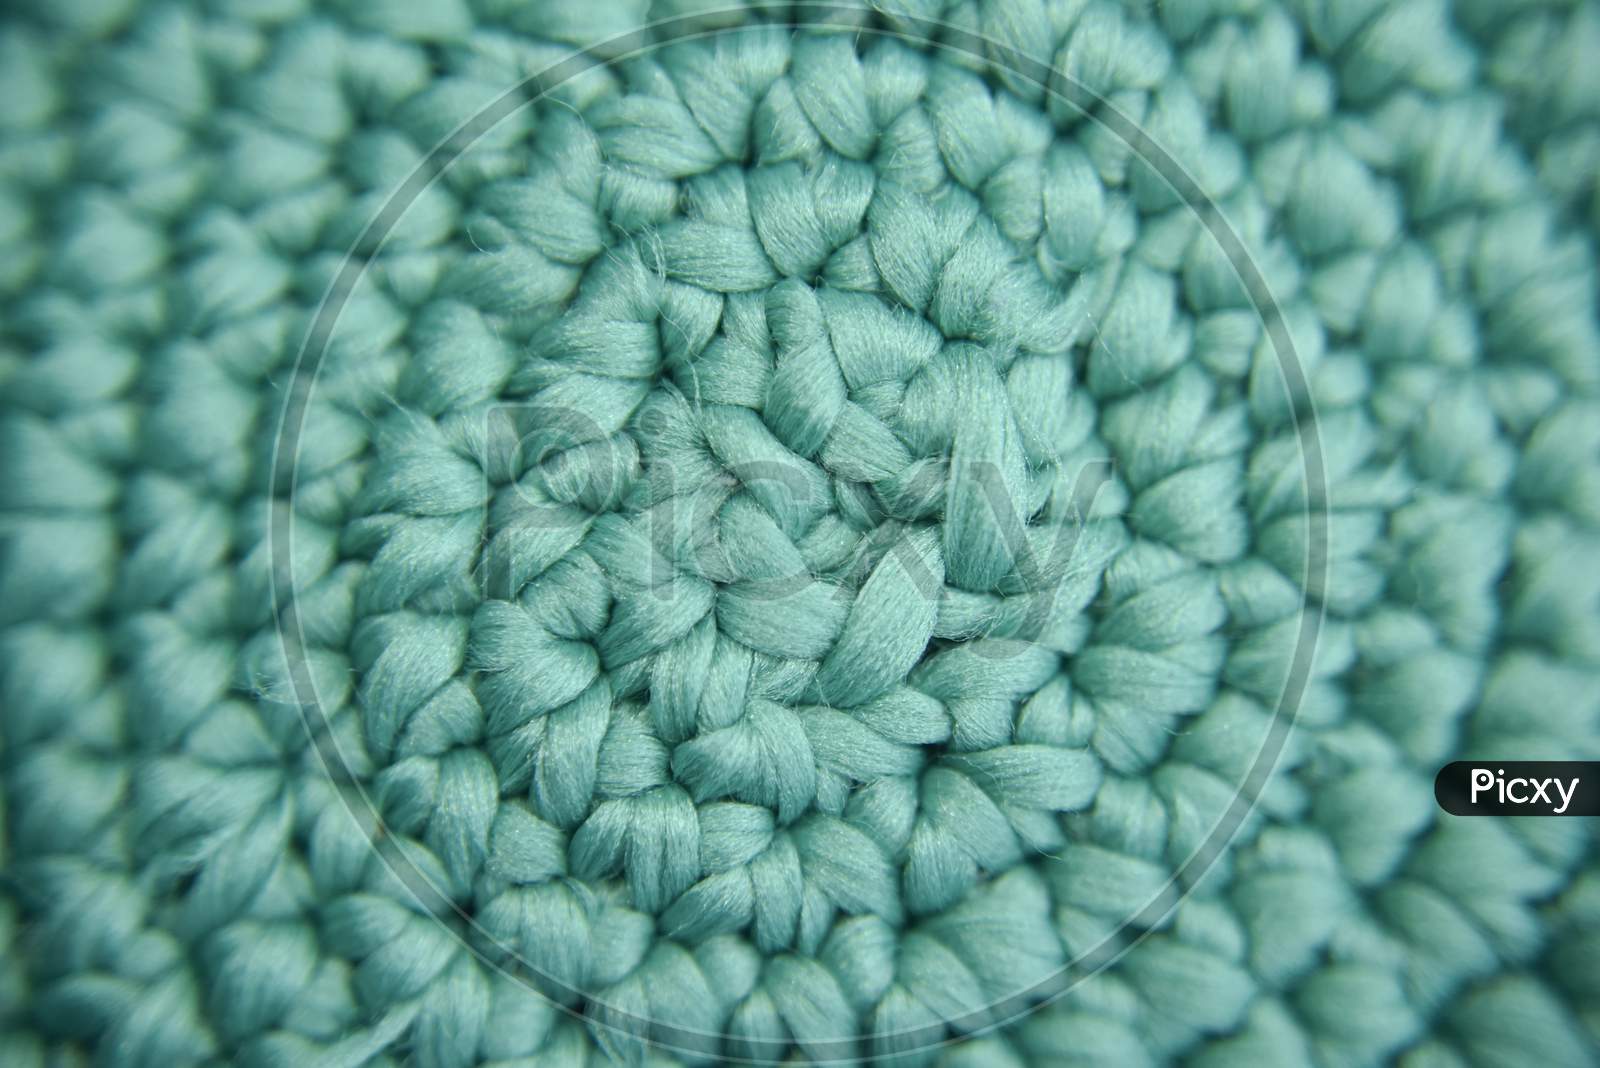 Center Focused Knitted Pattern Of Green Fiber In The Shape Of Vortex. Selective Focus.